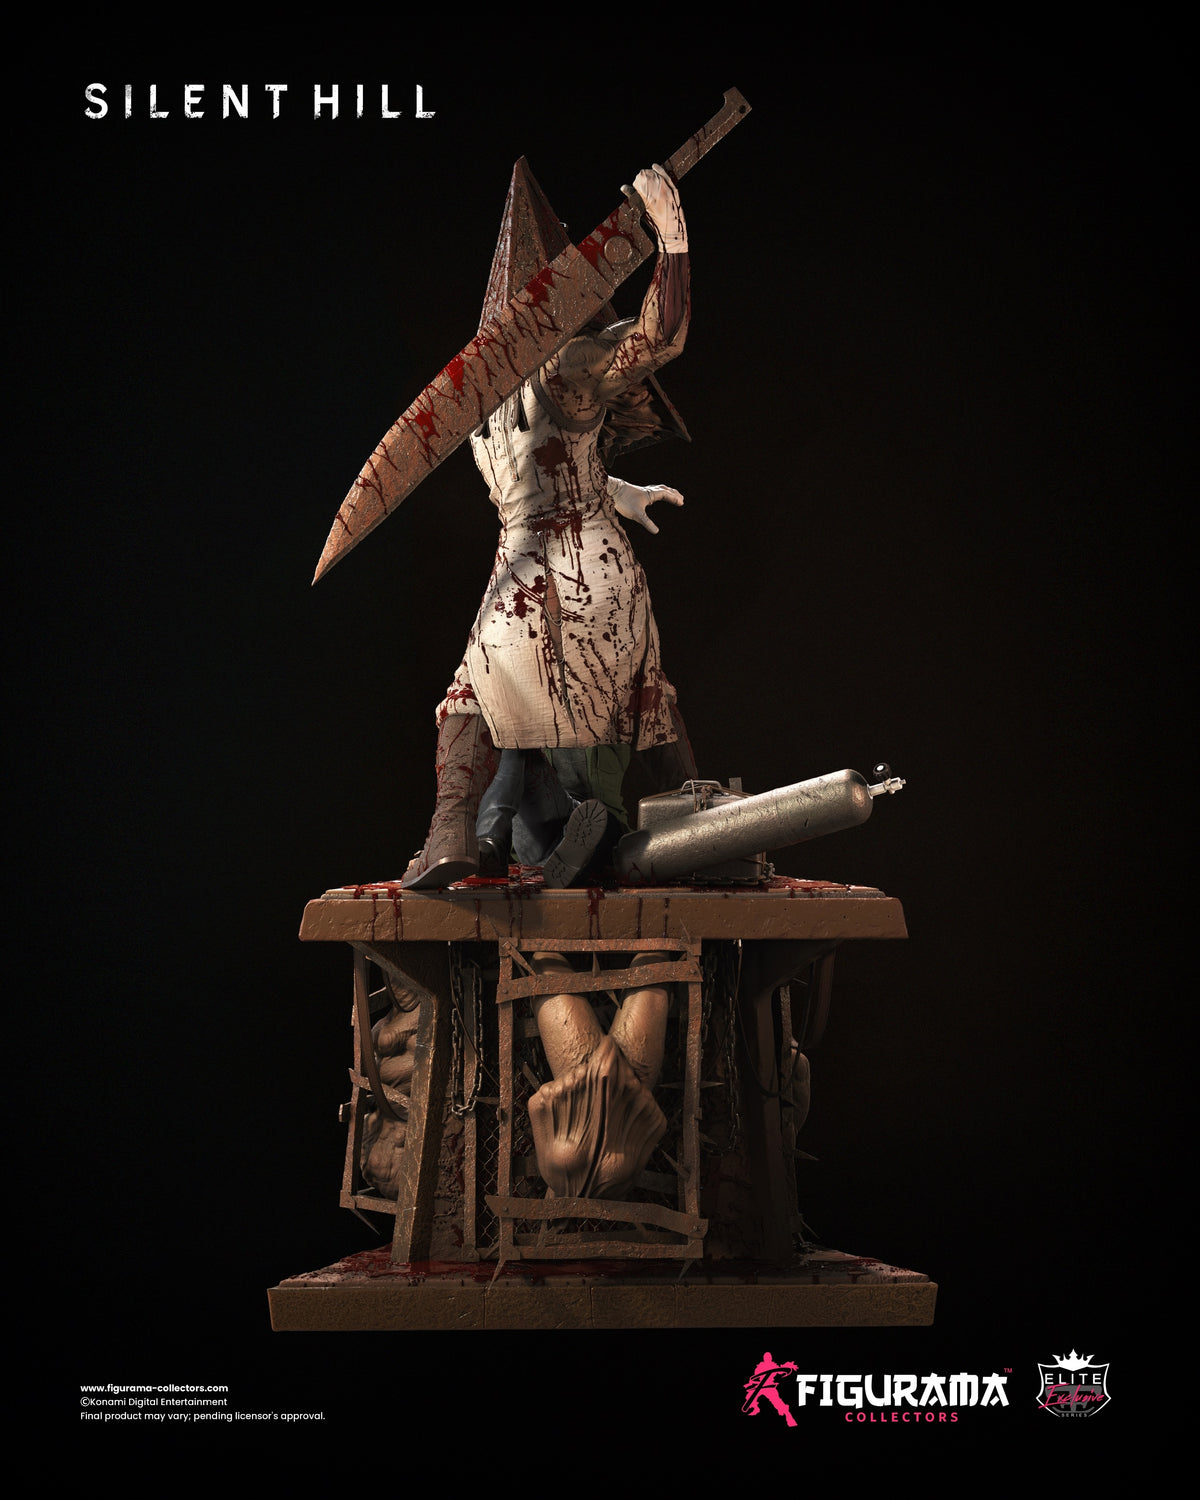 pyramid character silent hill - Google Search